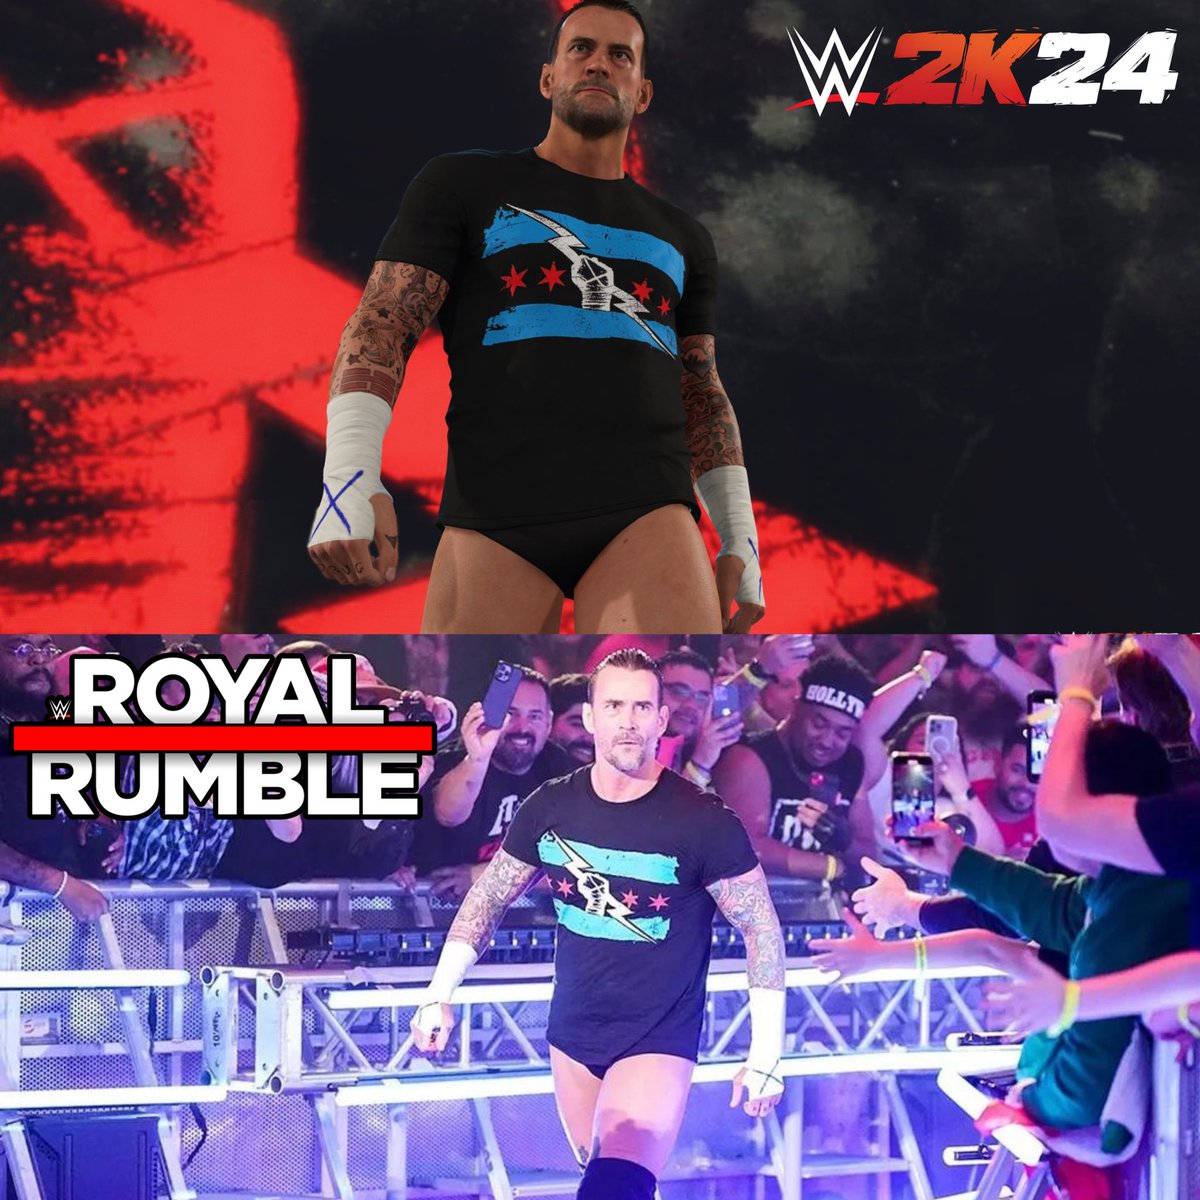 CM Punk 》Royal Rumble 2024

GAMES APPEARED IN:
• #WWE2K24